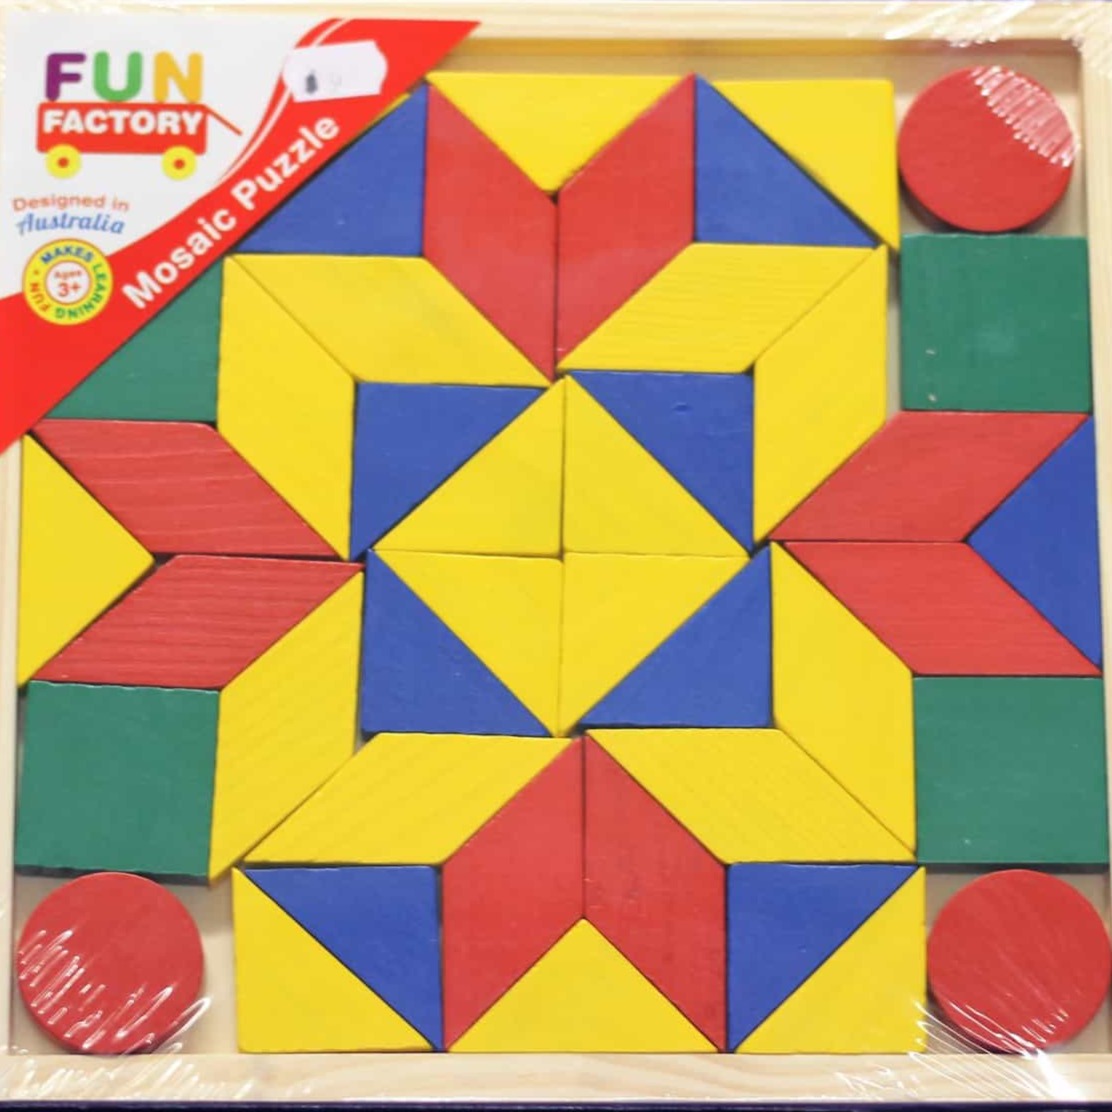 Fun Factory Wooden Mosaic Puzzle